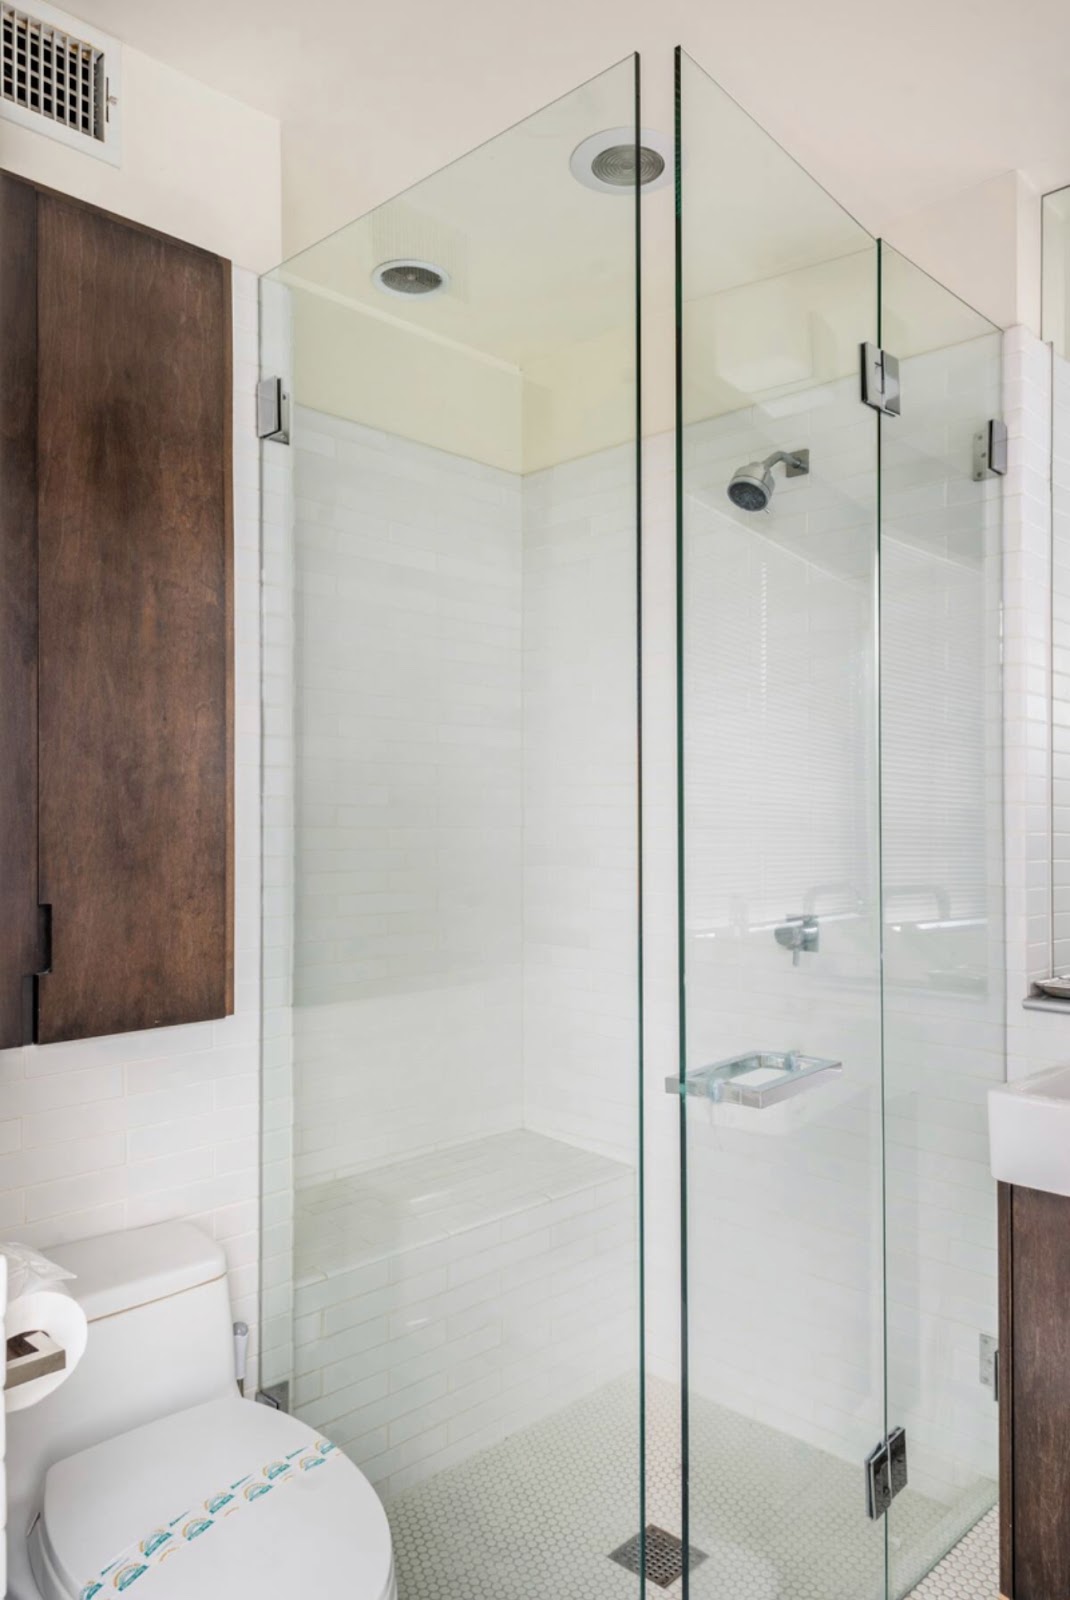 A bathroom with a glass shower door and white walls.